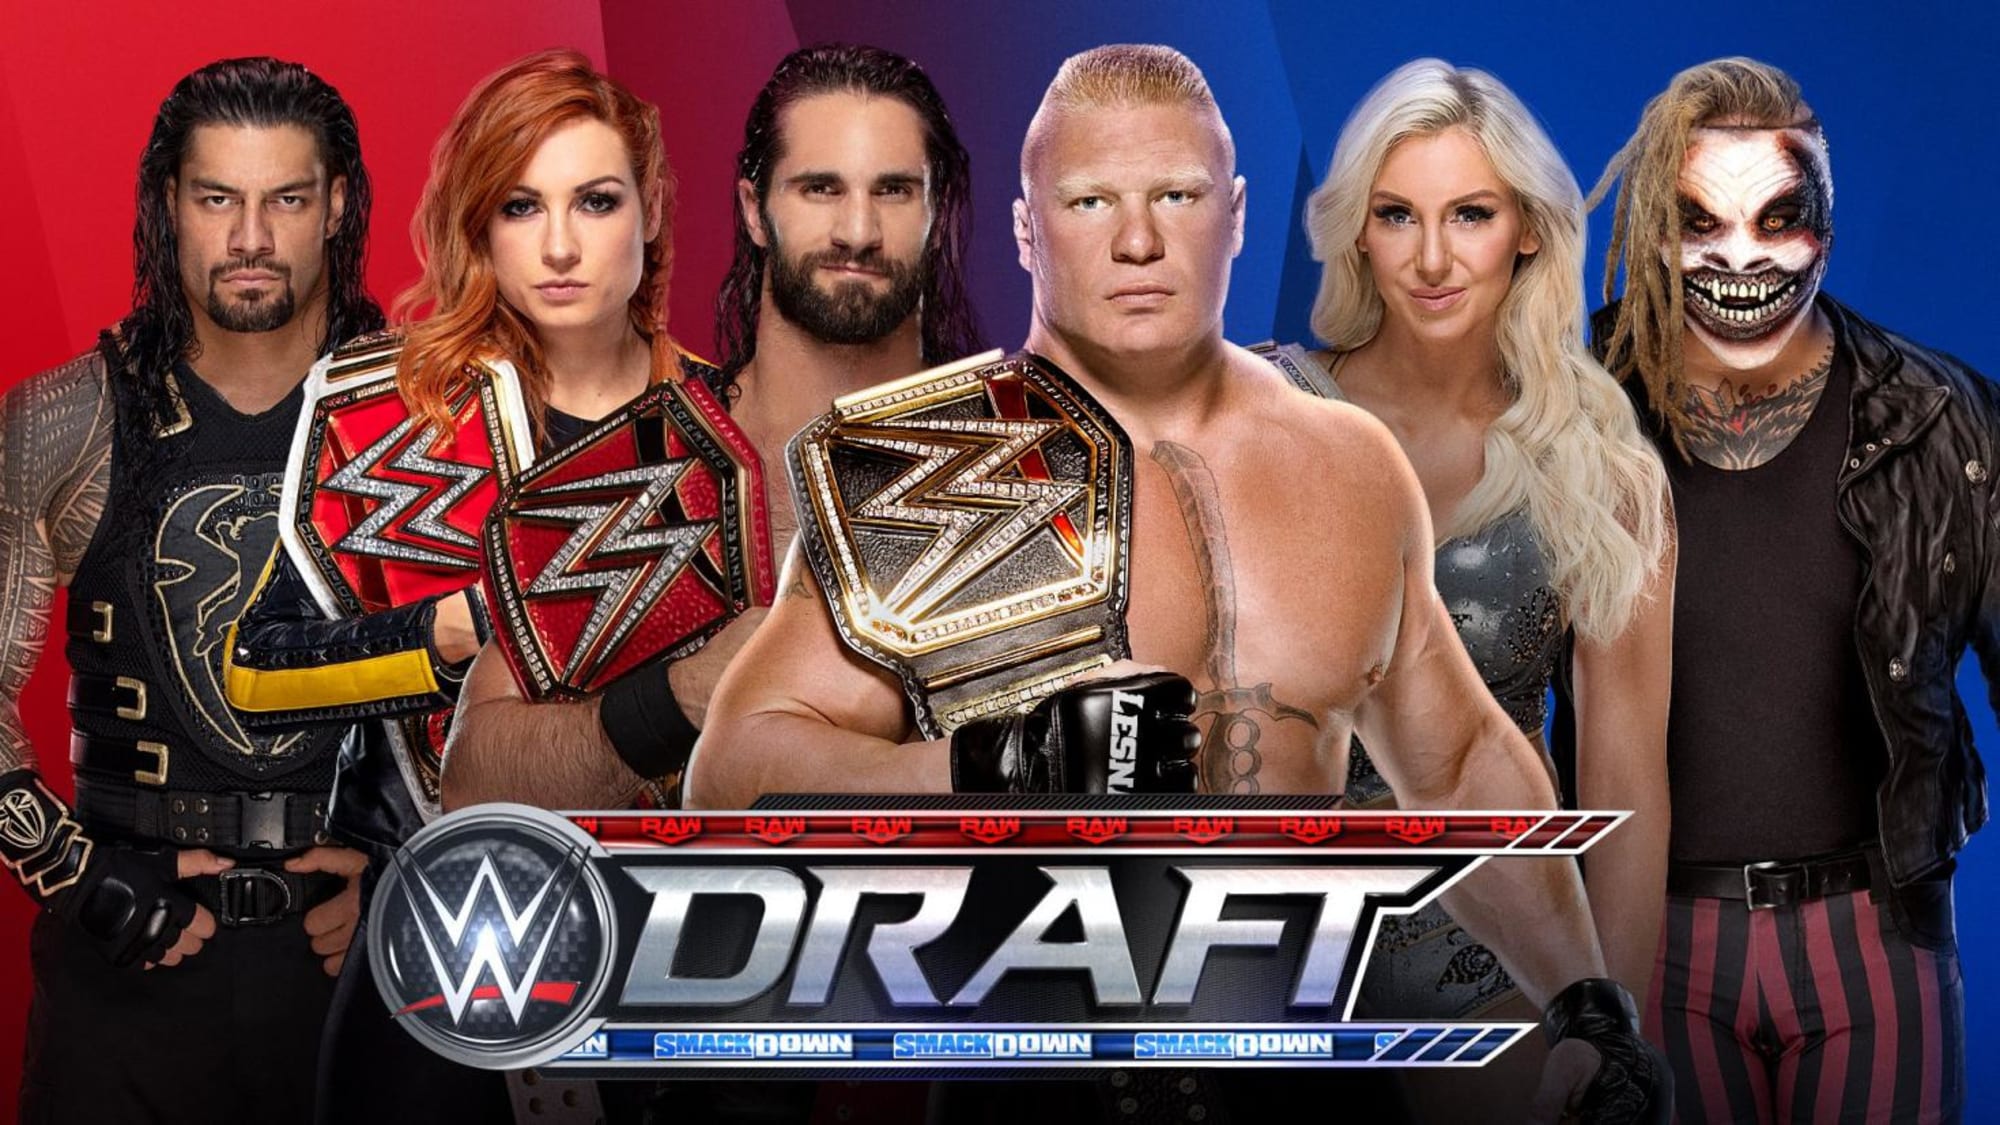 WWE Draft Daily DDT’s fantasy picks for the Raw and SmackDown rosters